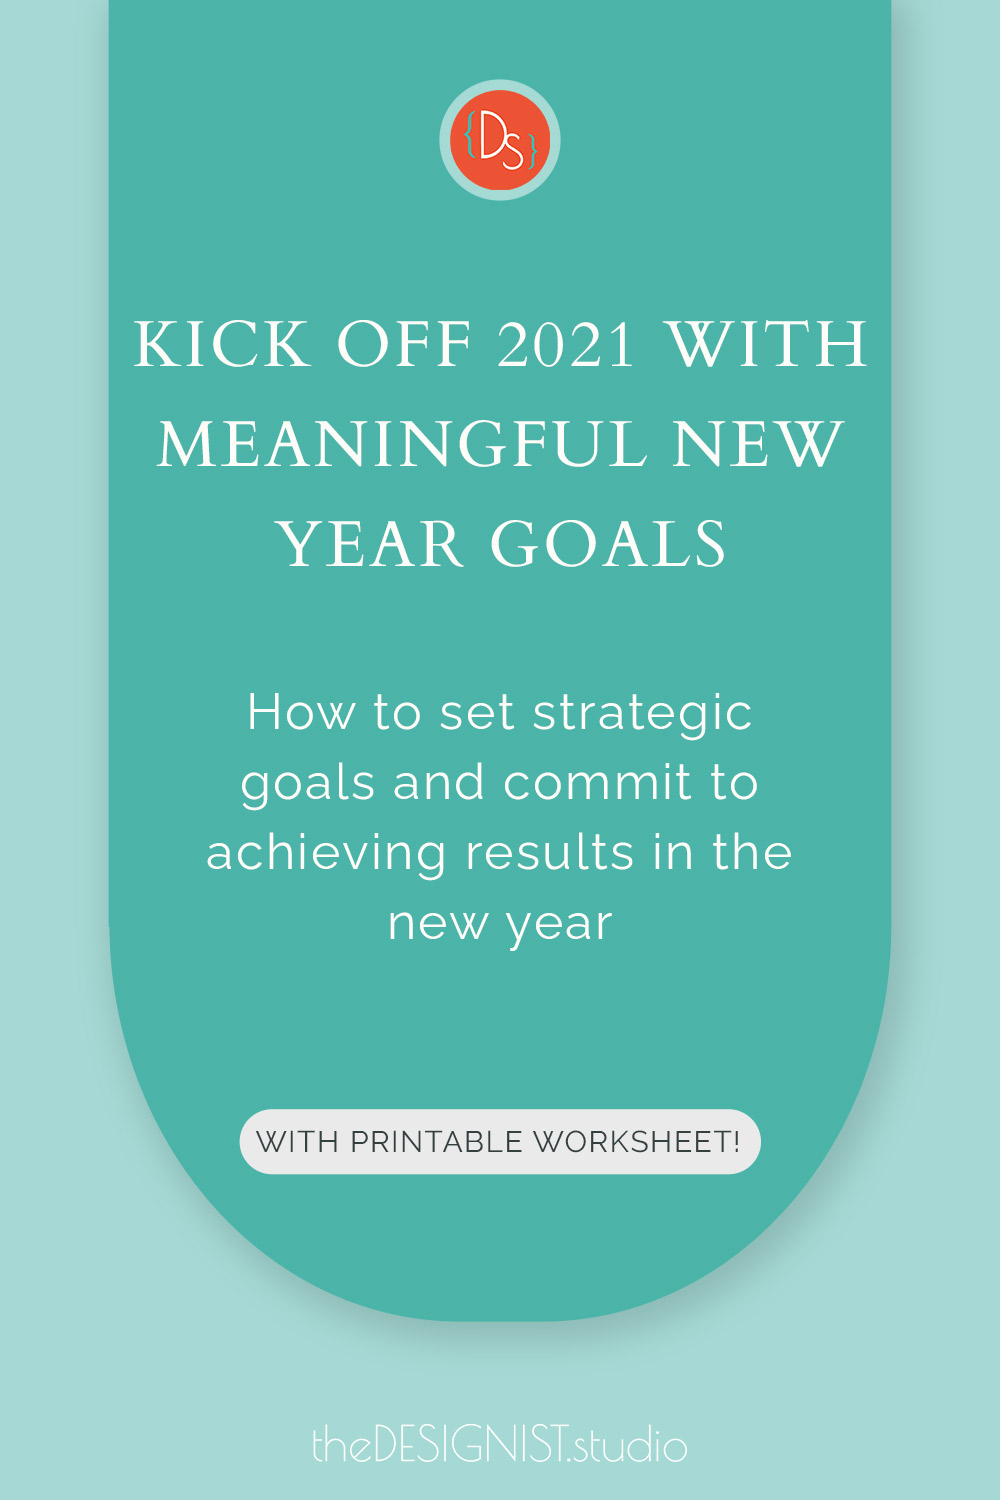 Kick off 2021 with meaningful new year goals